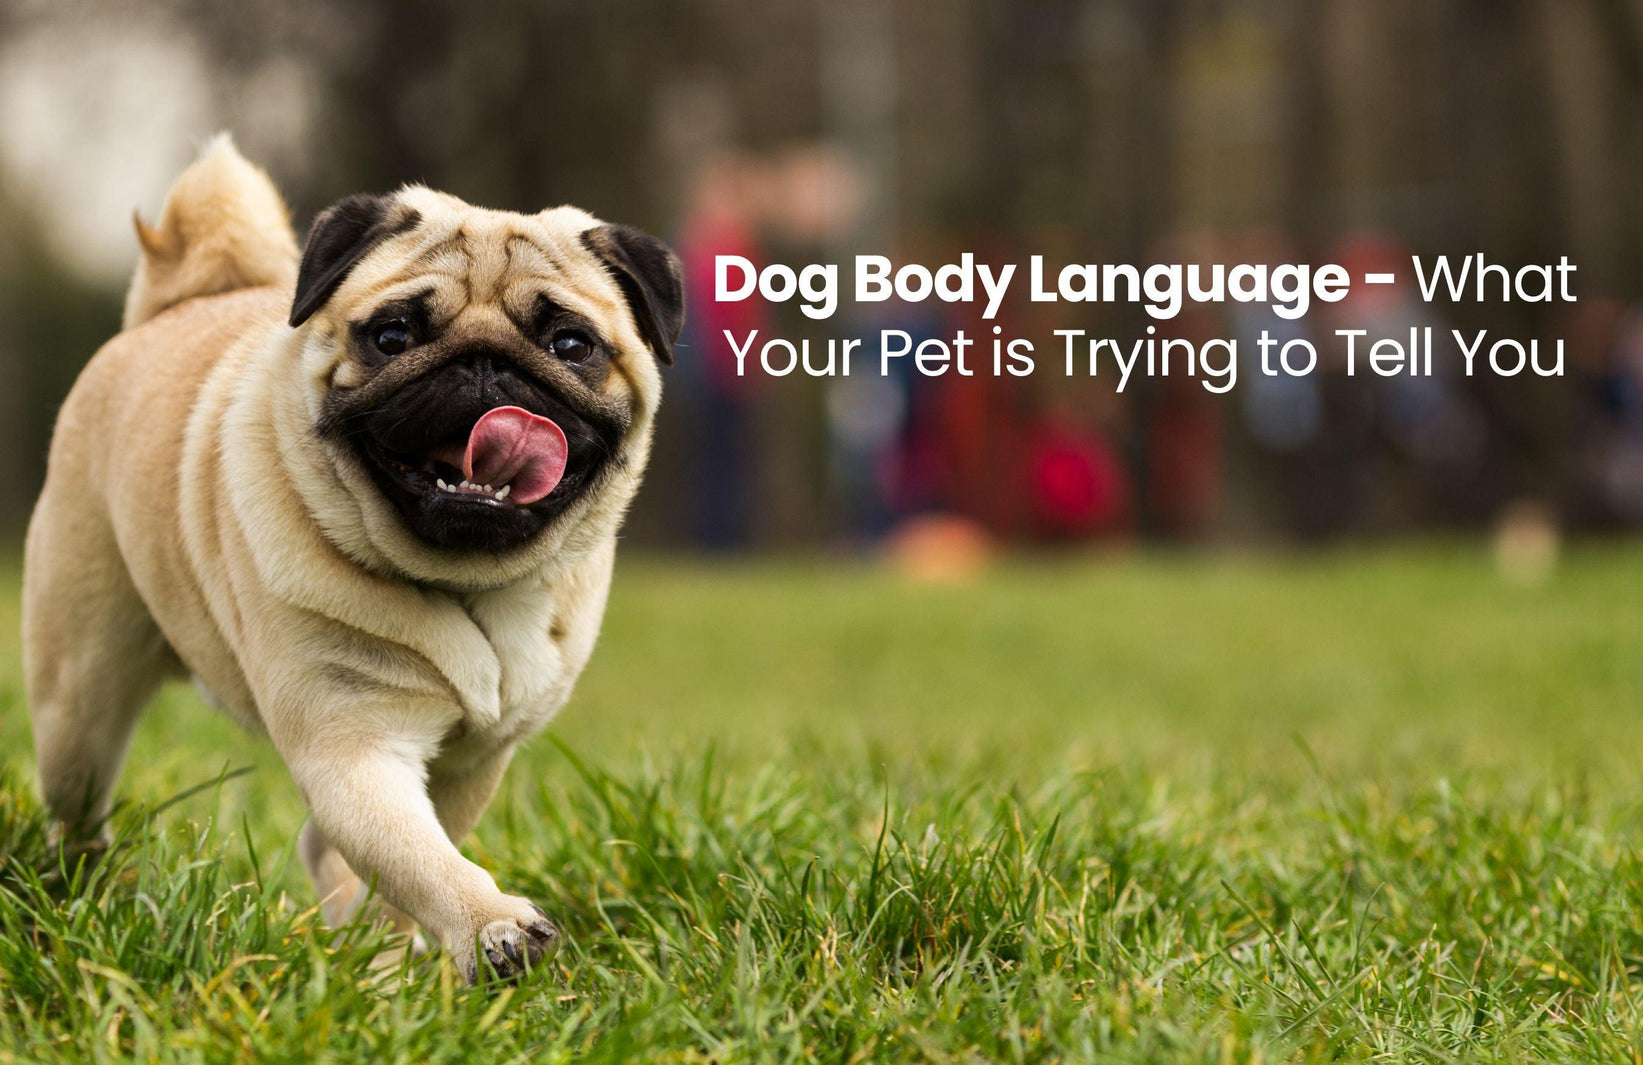 Dog Body Language - What Your Pet is Trying to Tell You - Furry Tails